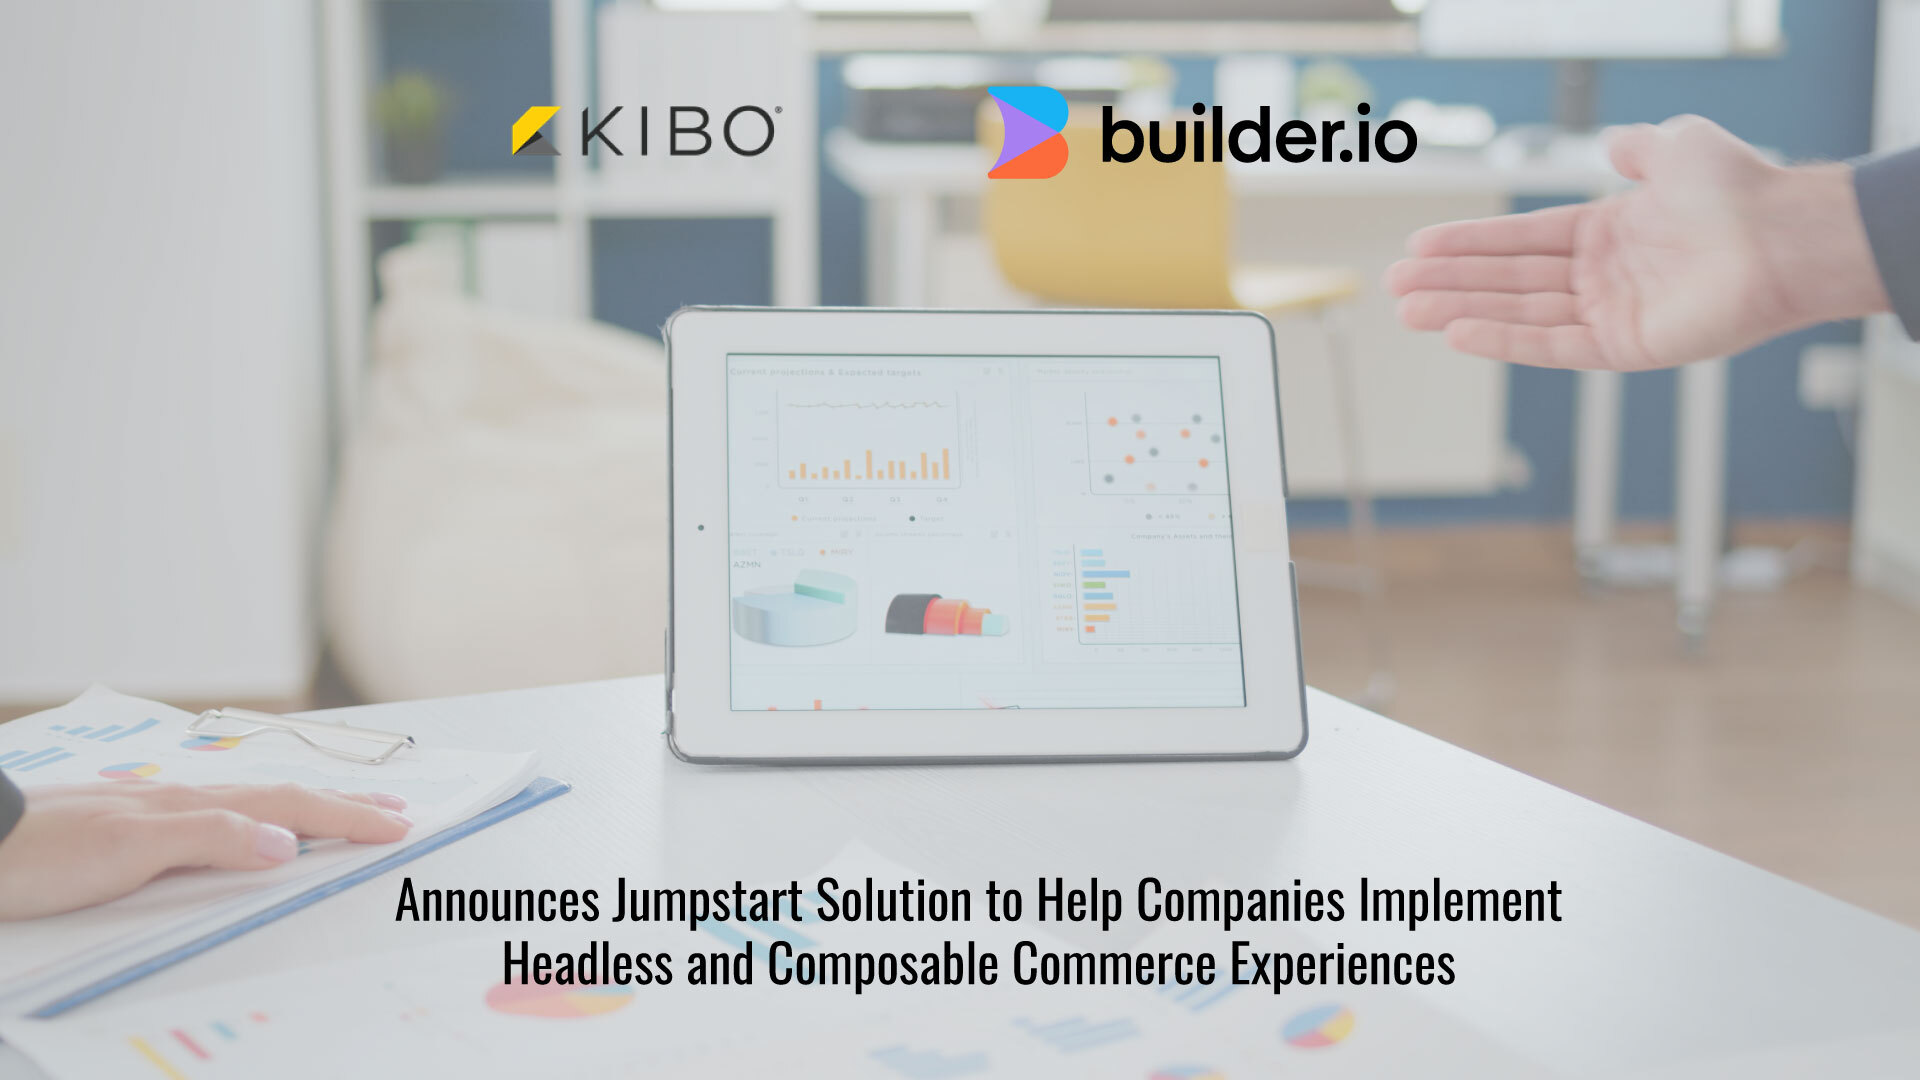 Kibo and Builder.io Announce Joint Solution to Jumpstart Implementations of Headless and Composable Commerce Experiences